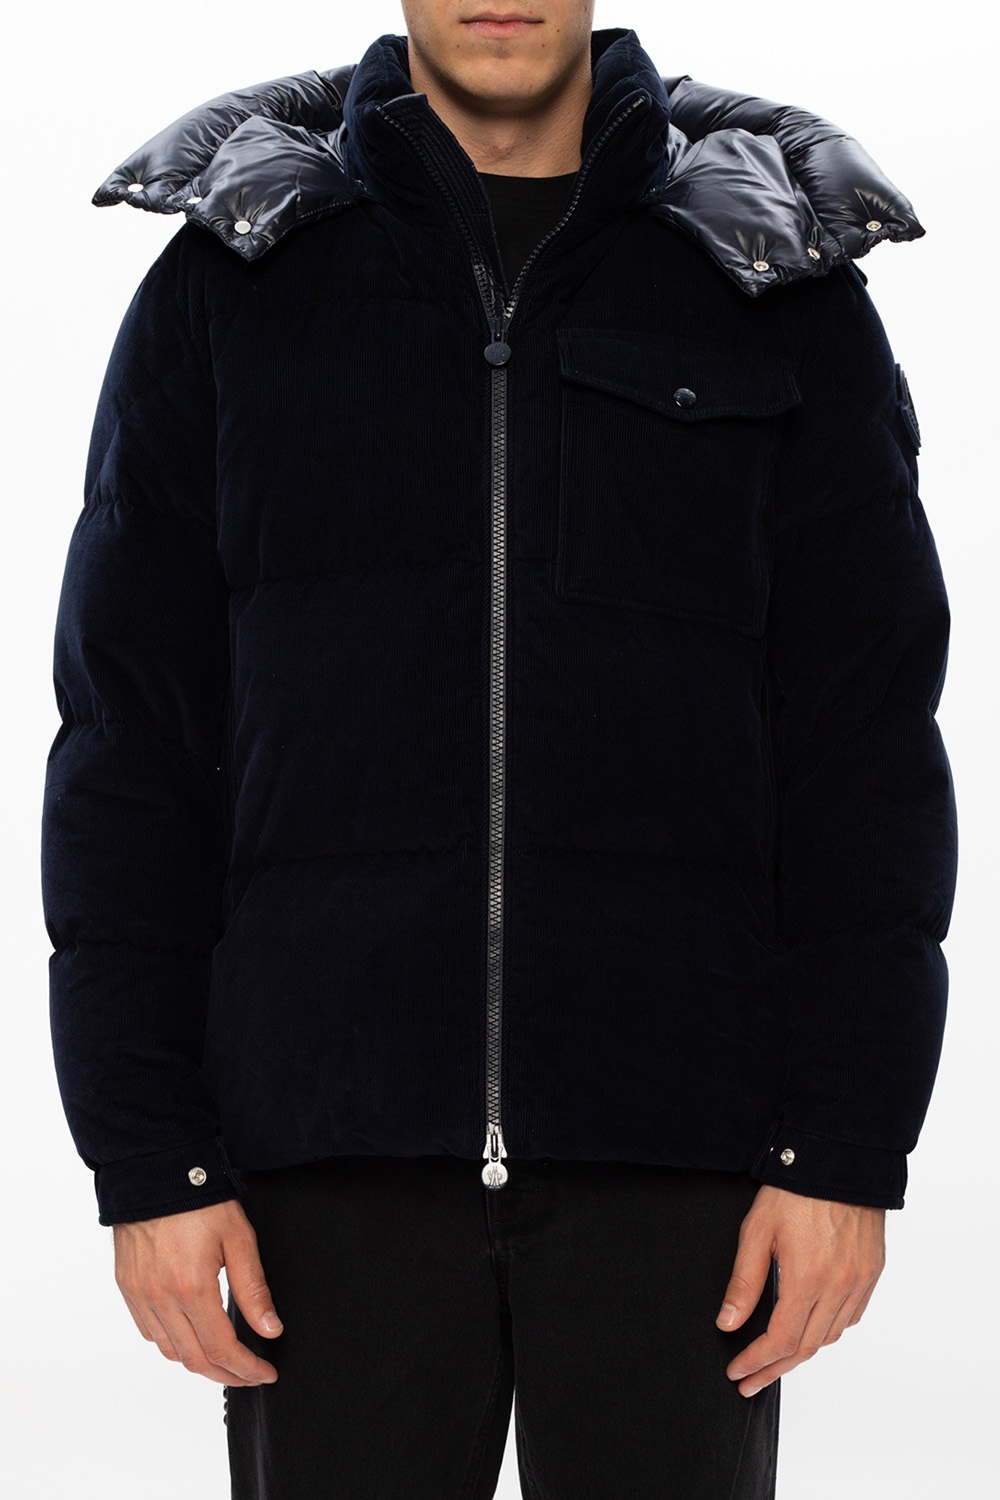 Navy blue 'Vignemale' quilted down jacket with hood Moncler - Vitkac GB